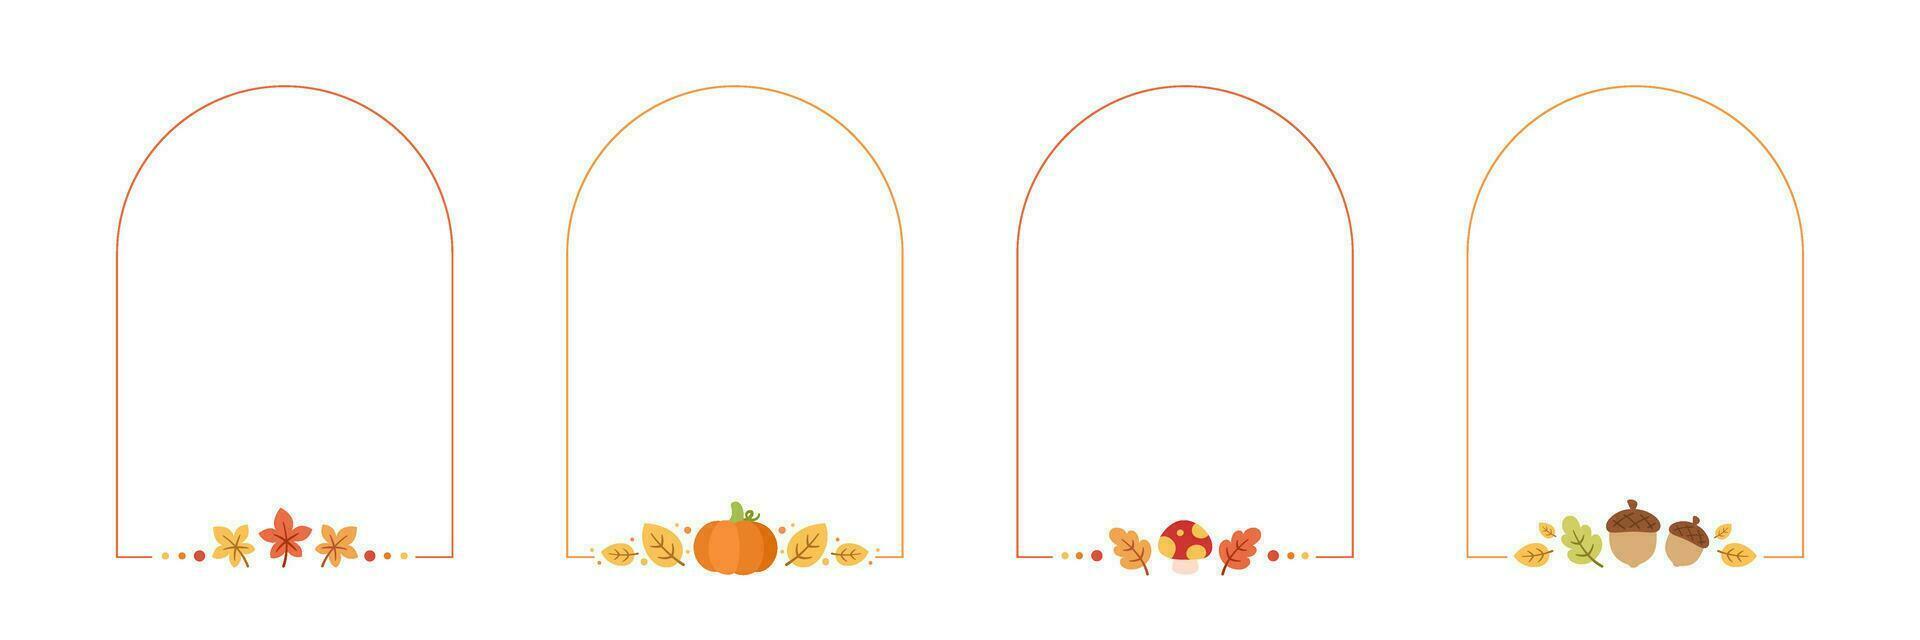 Vertical Autumn Frame Border Set. Halloween, Fall and Thanksgiving Template. Can be used for shopping sale, promo poster, banner, etc. Vector illustration